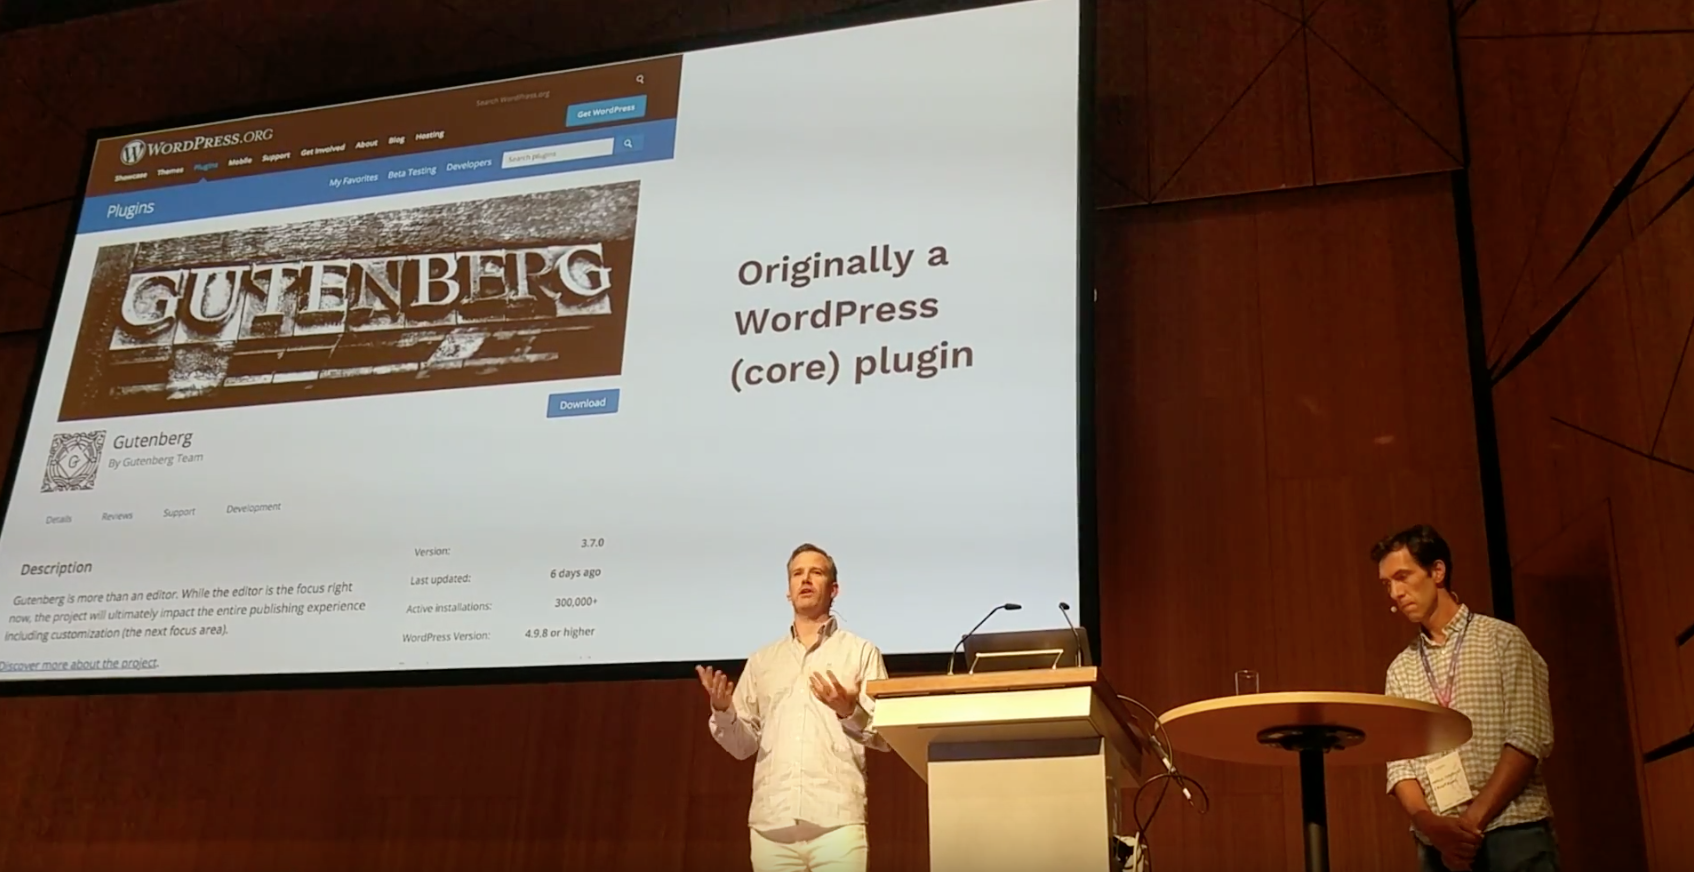 Drupal Gutenberg Project Receives Enthusiastic Reception at Drupal Europe